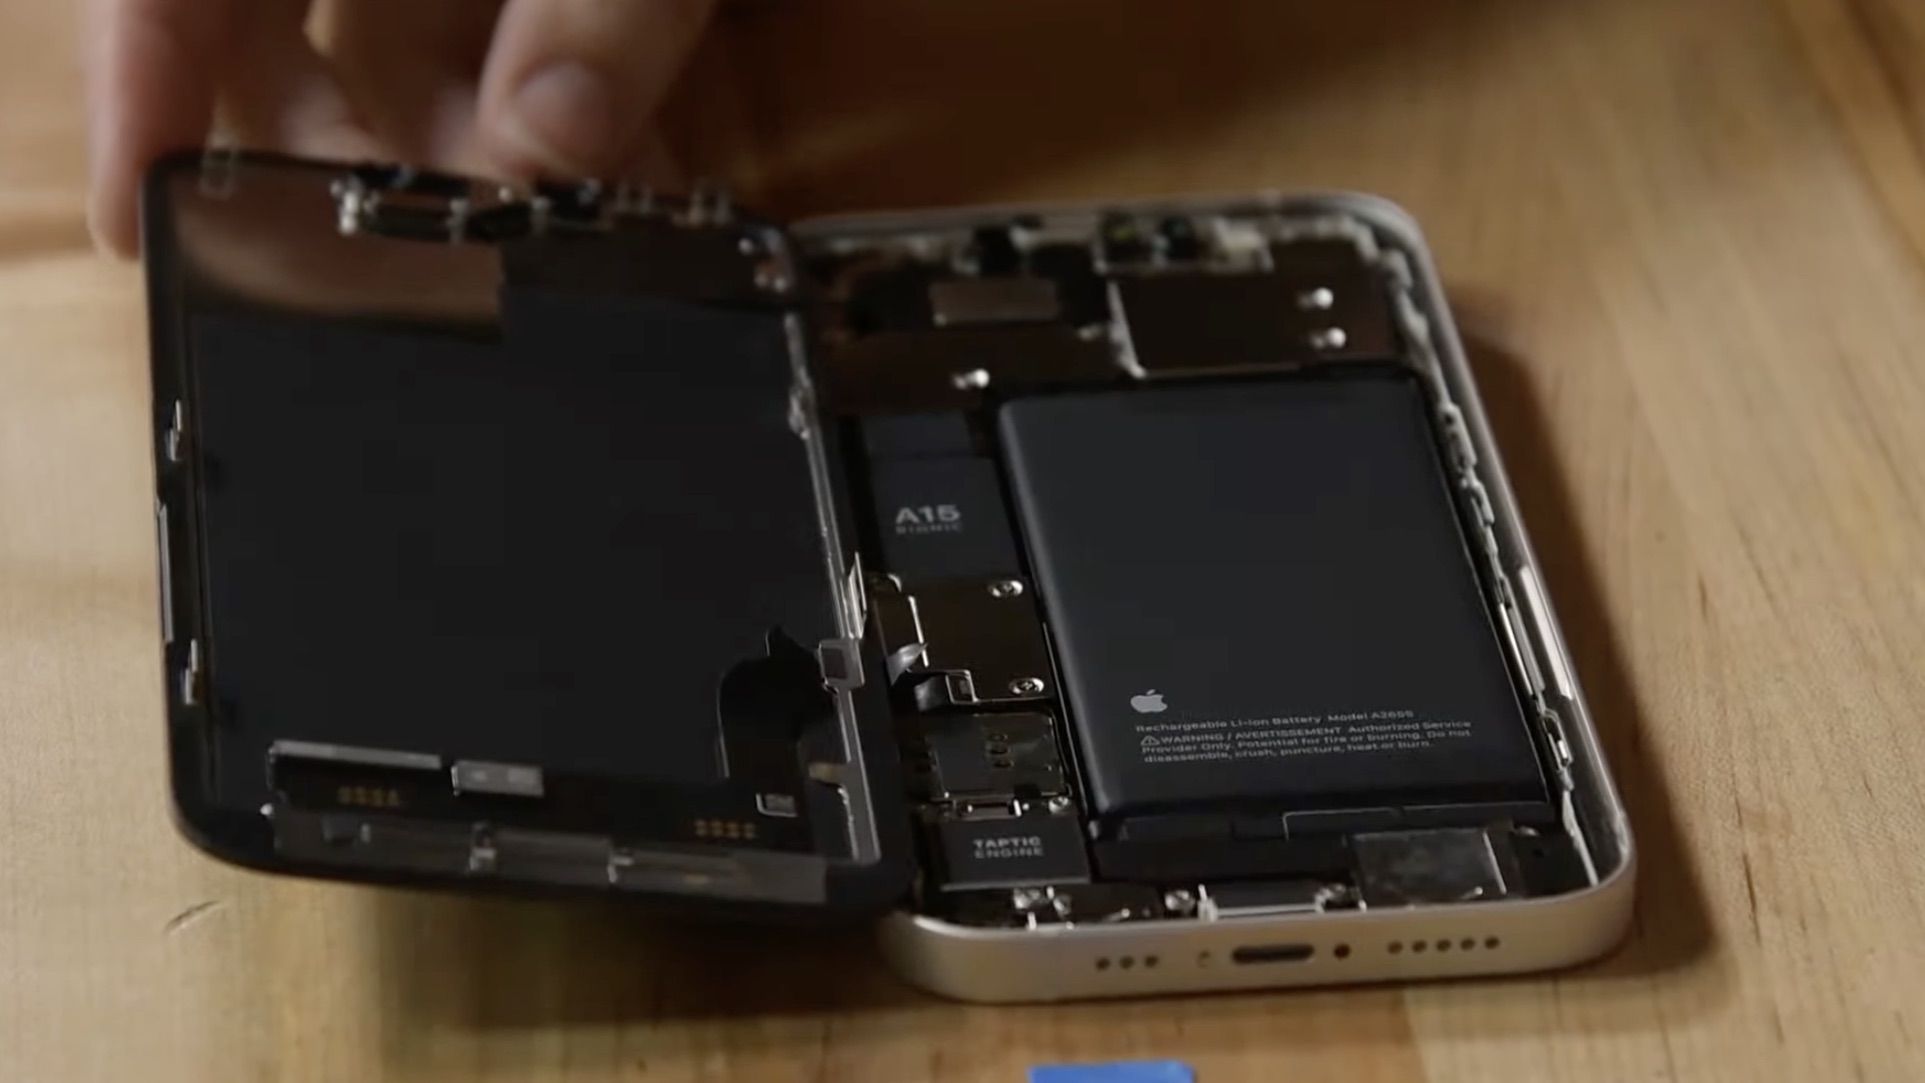 Samsung Battery Technology Adapted From EVs Could Boost iPhone Battery Life - macrumors.com